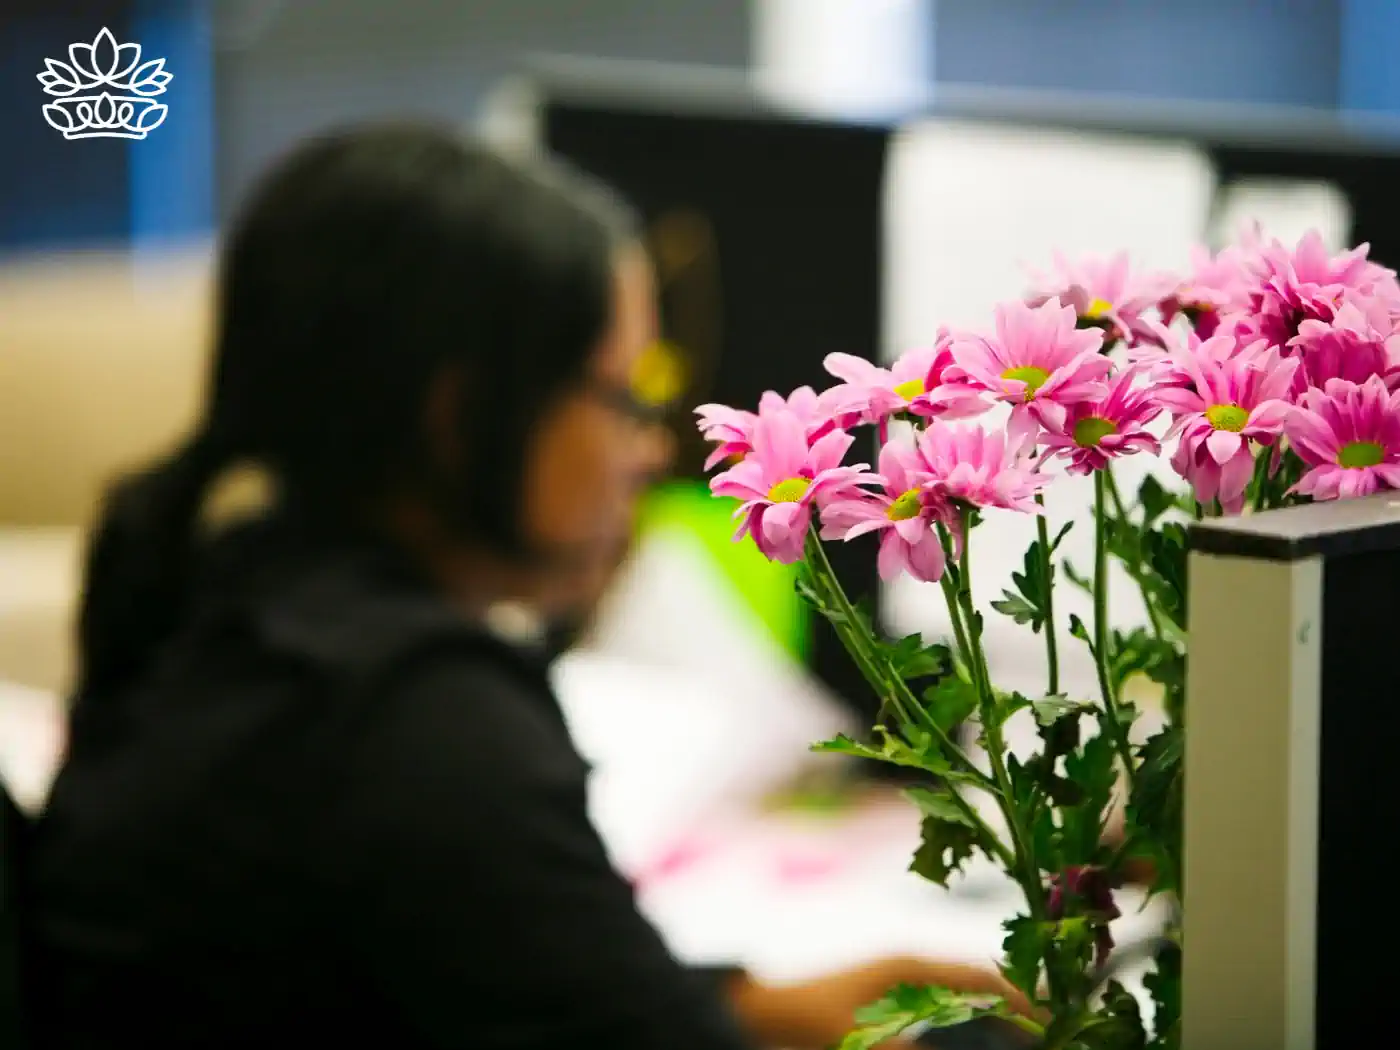 Close-up of pink daisies in a modern office environment, bringing a touch of nature to the workspace. Fabulous Flowers and Gifts - Office Flowers Collection.